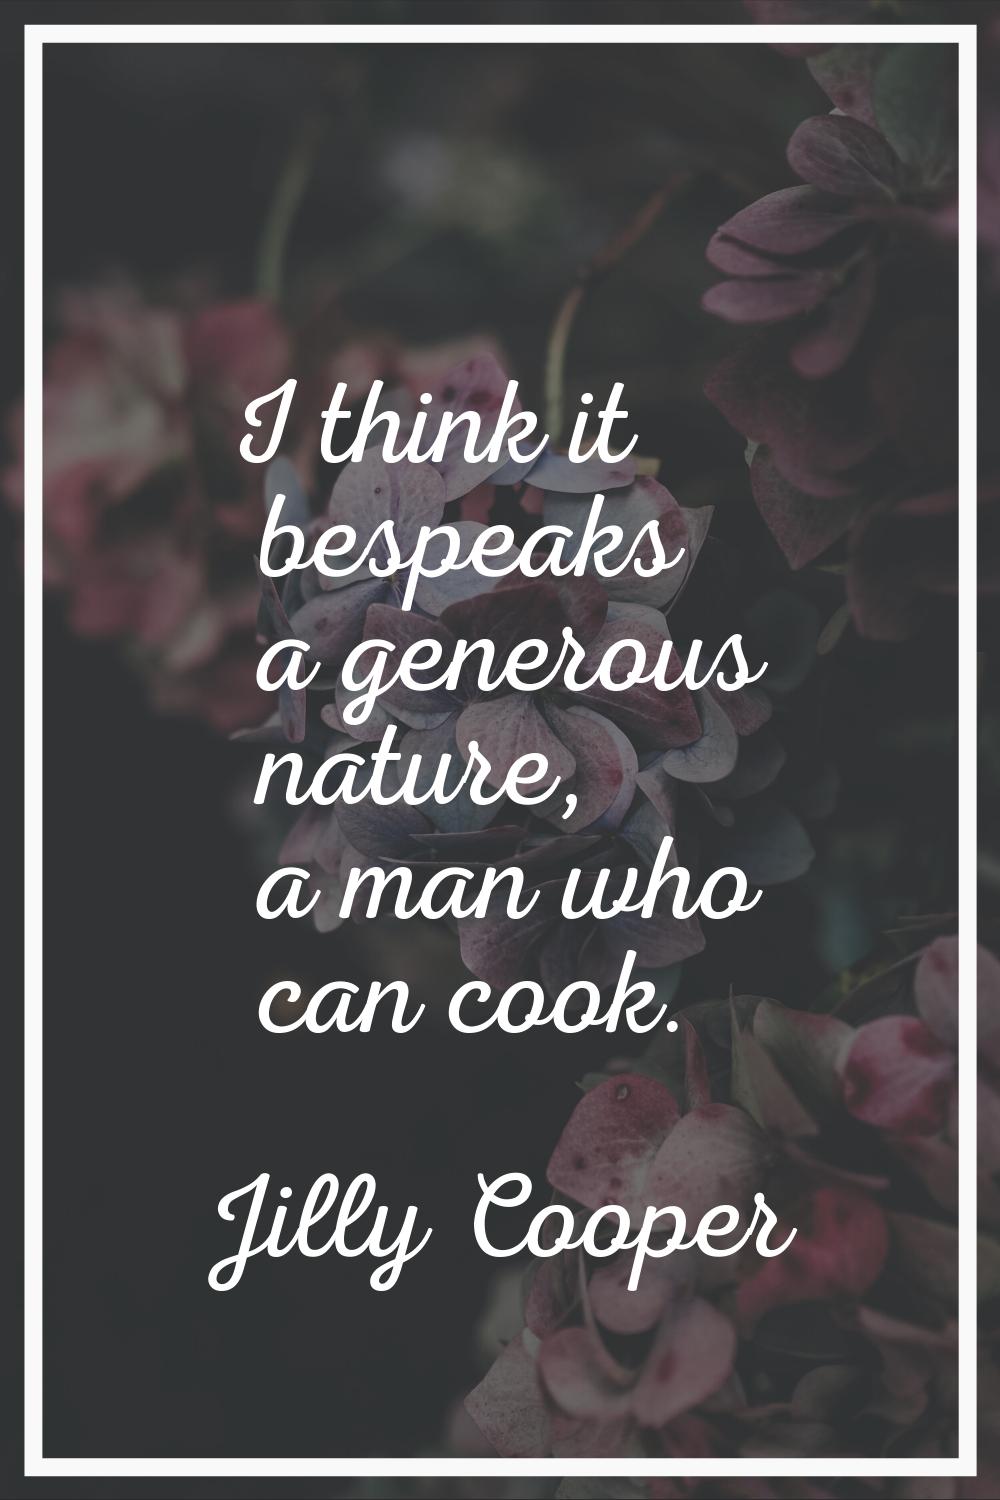 I think it bespeaks a generous nature, a man who can cook.